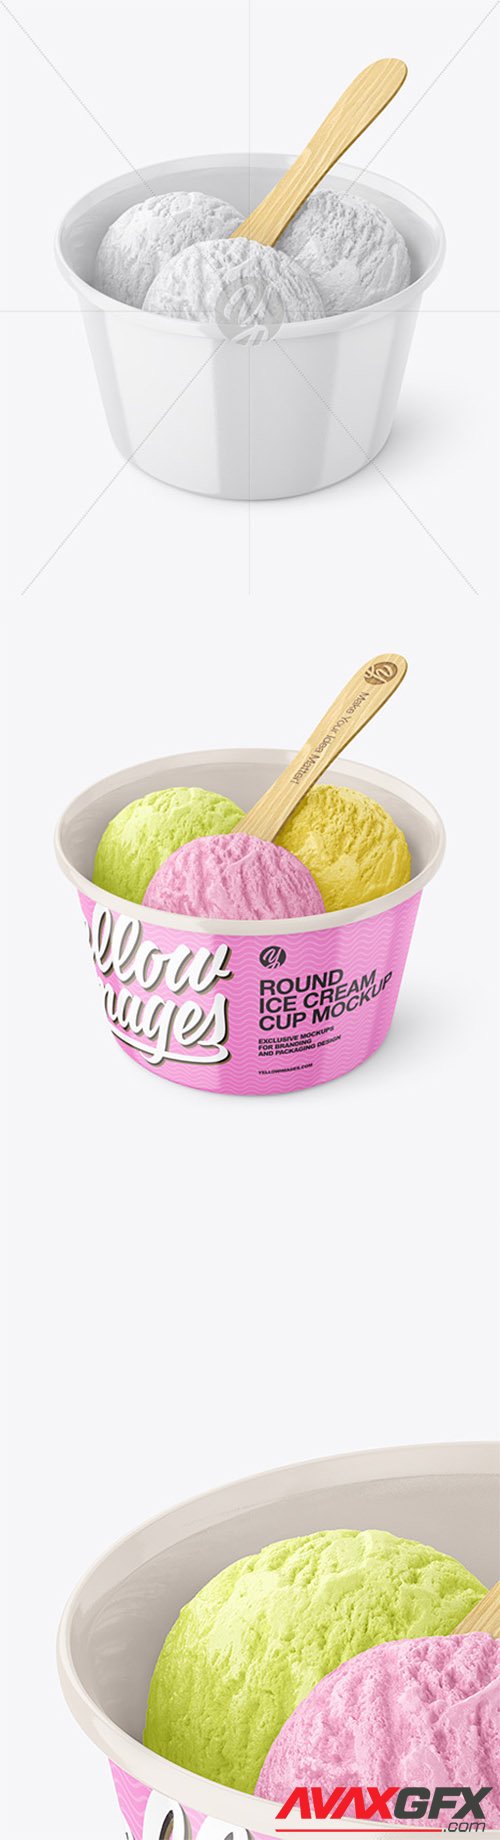 Glossy Ice Cream Cup w/ Wooden Stick Mockup 83475 TIF